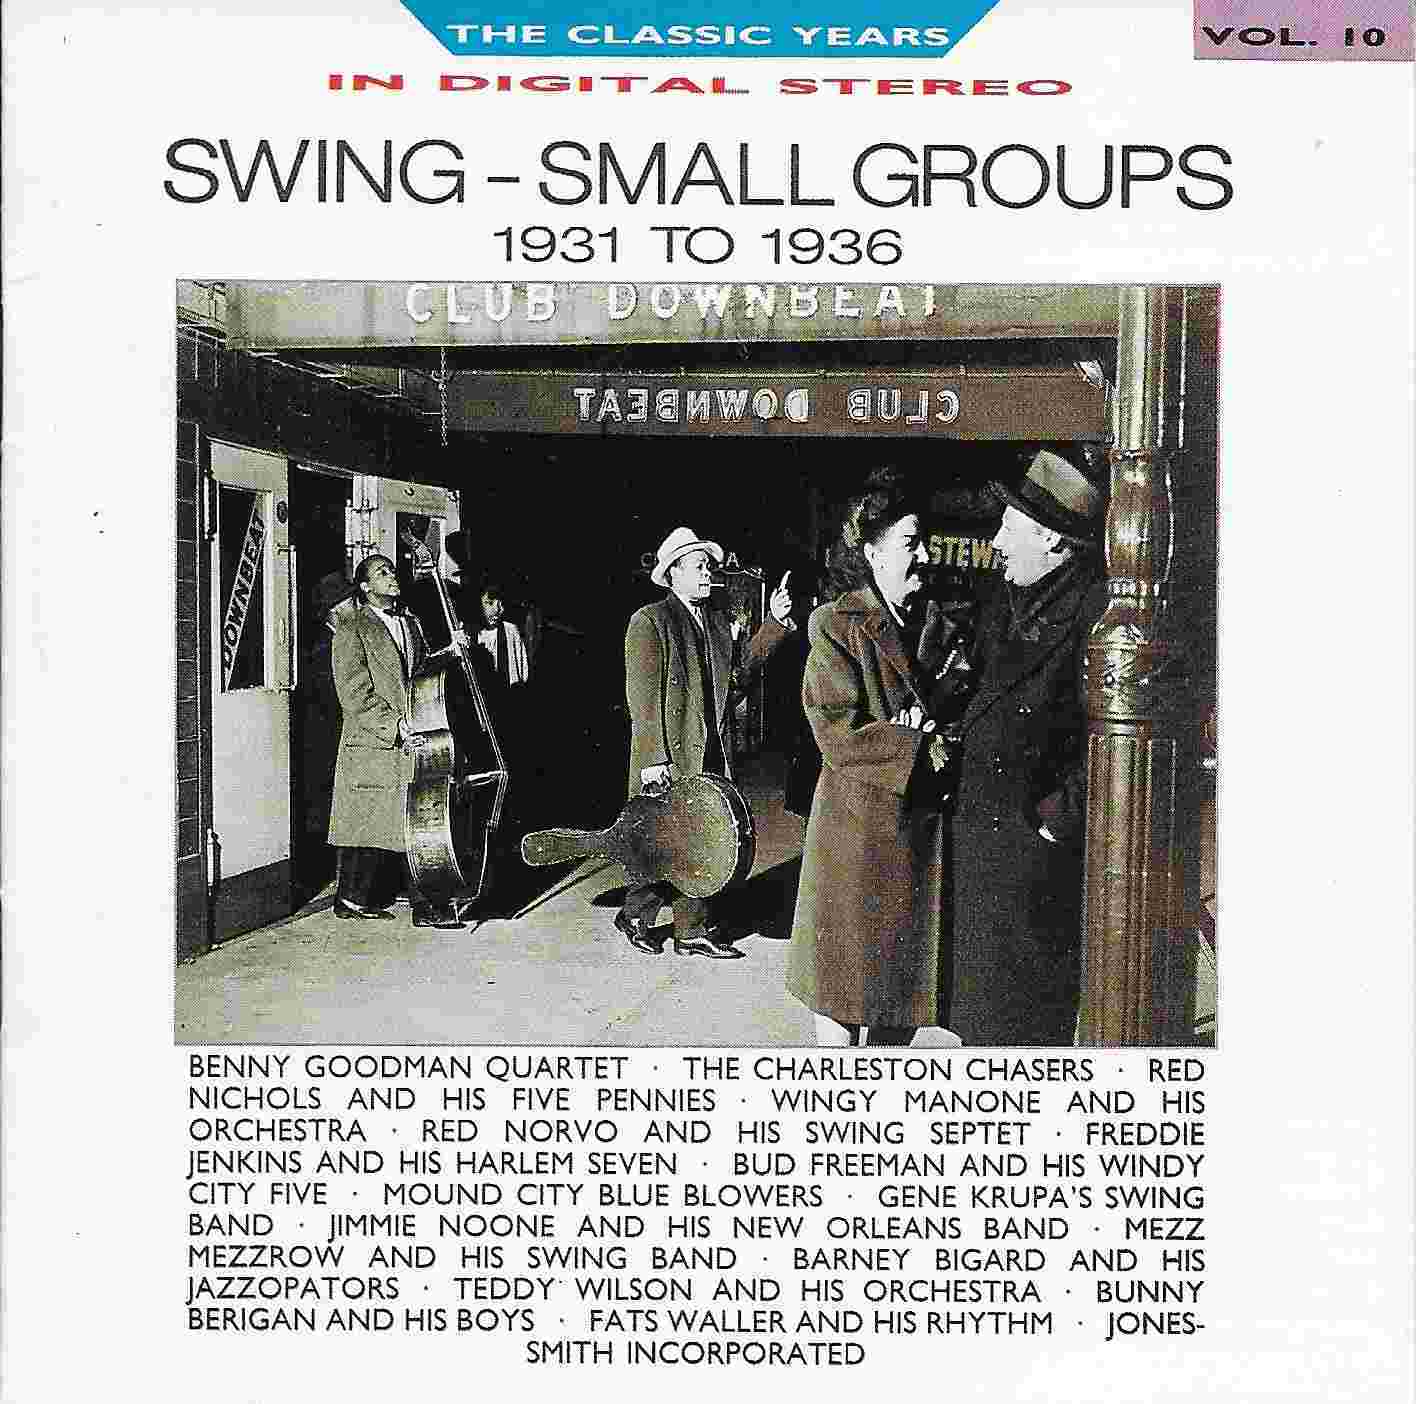 Picture of Classic years - Volume 10, Swing small groups by artist Various from the BBC cds - Records and Tapes library